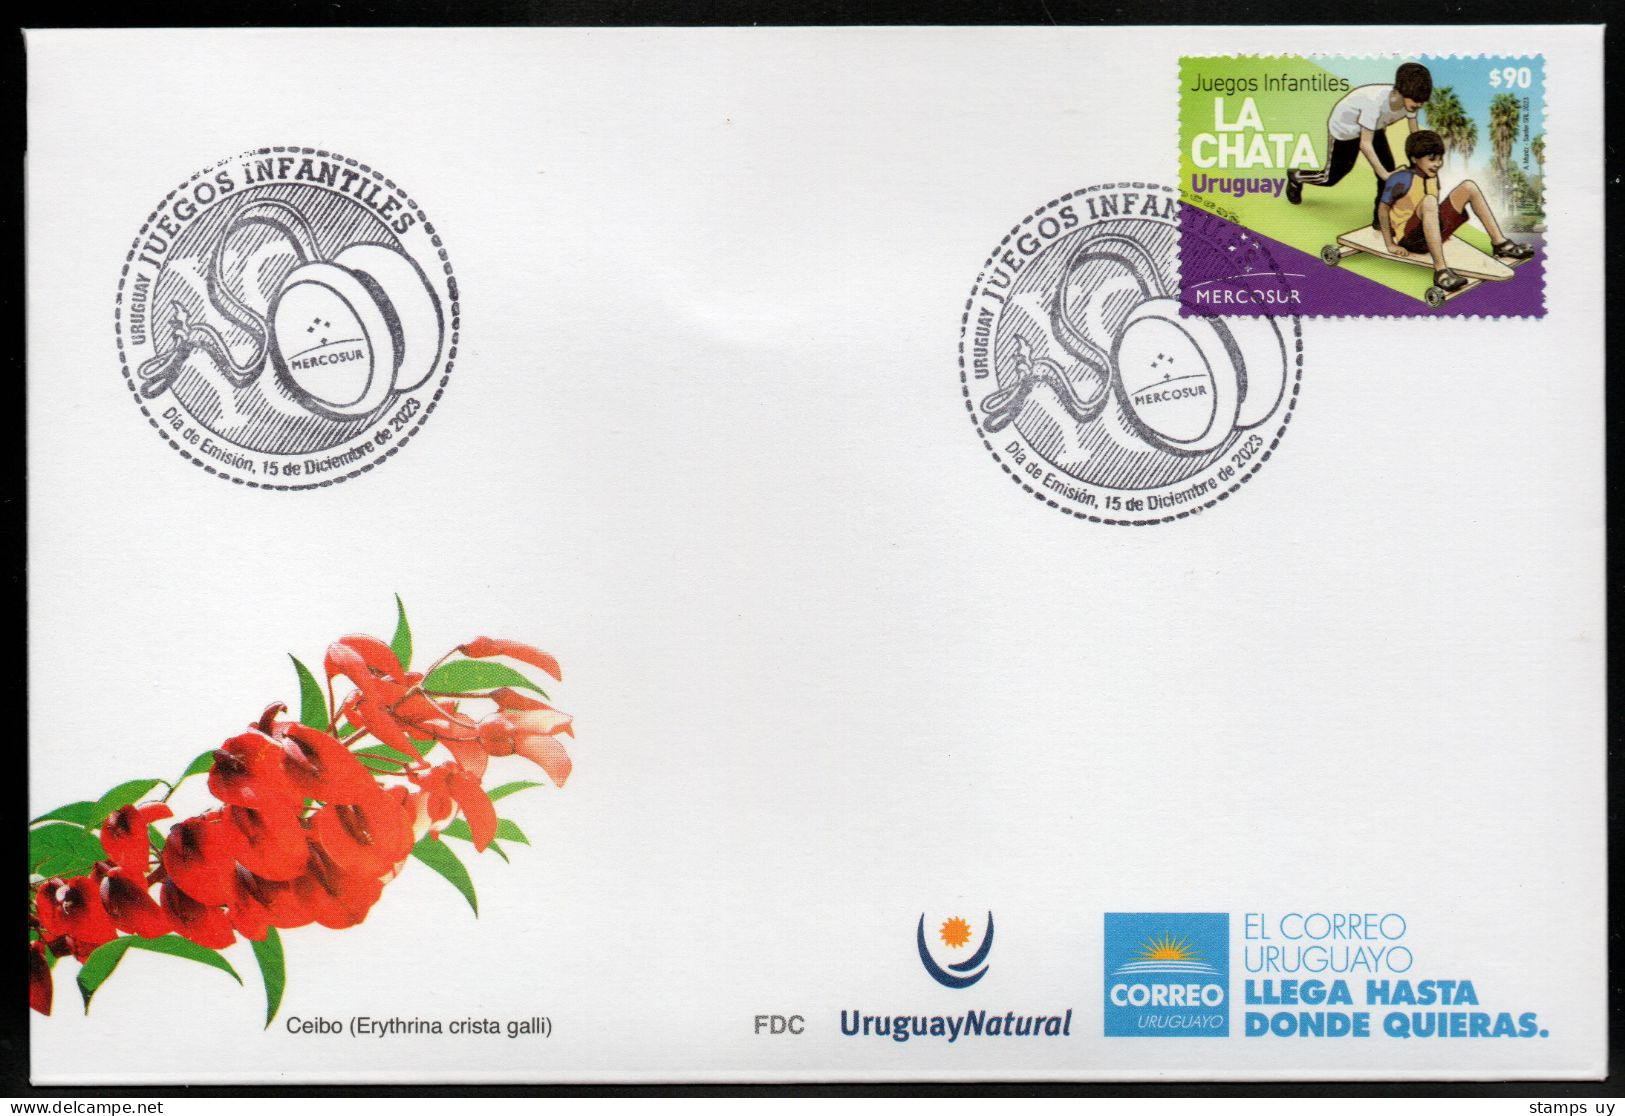 URUGUAY 2023 (Joint Issue, Mercosur, Games, Children, Toys, Wooden Cart, YoYo, Ruleman, Palm, Tree, Crux, Stars) - 1 FDC - Altri (Terra)